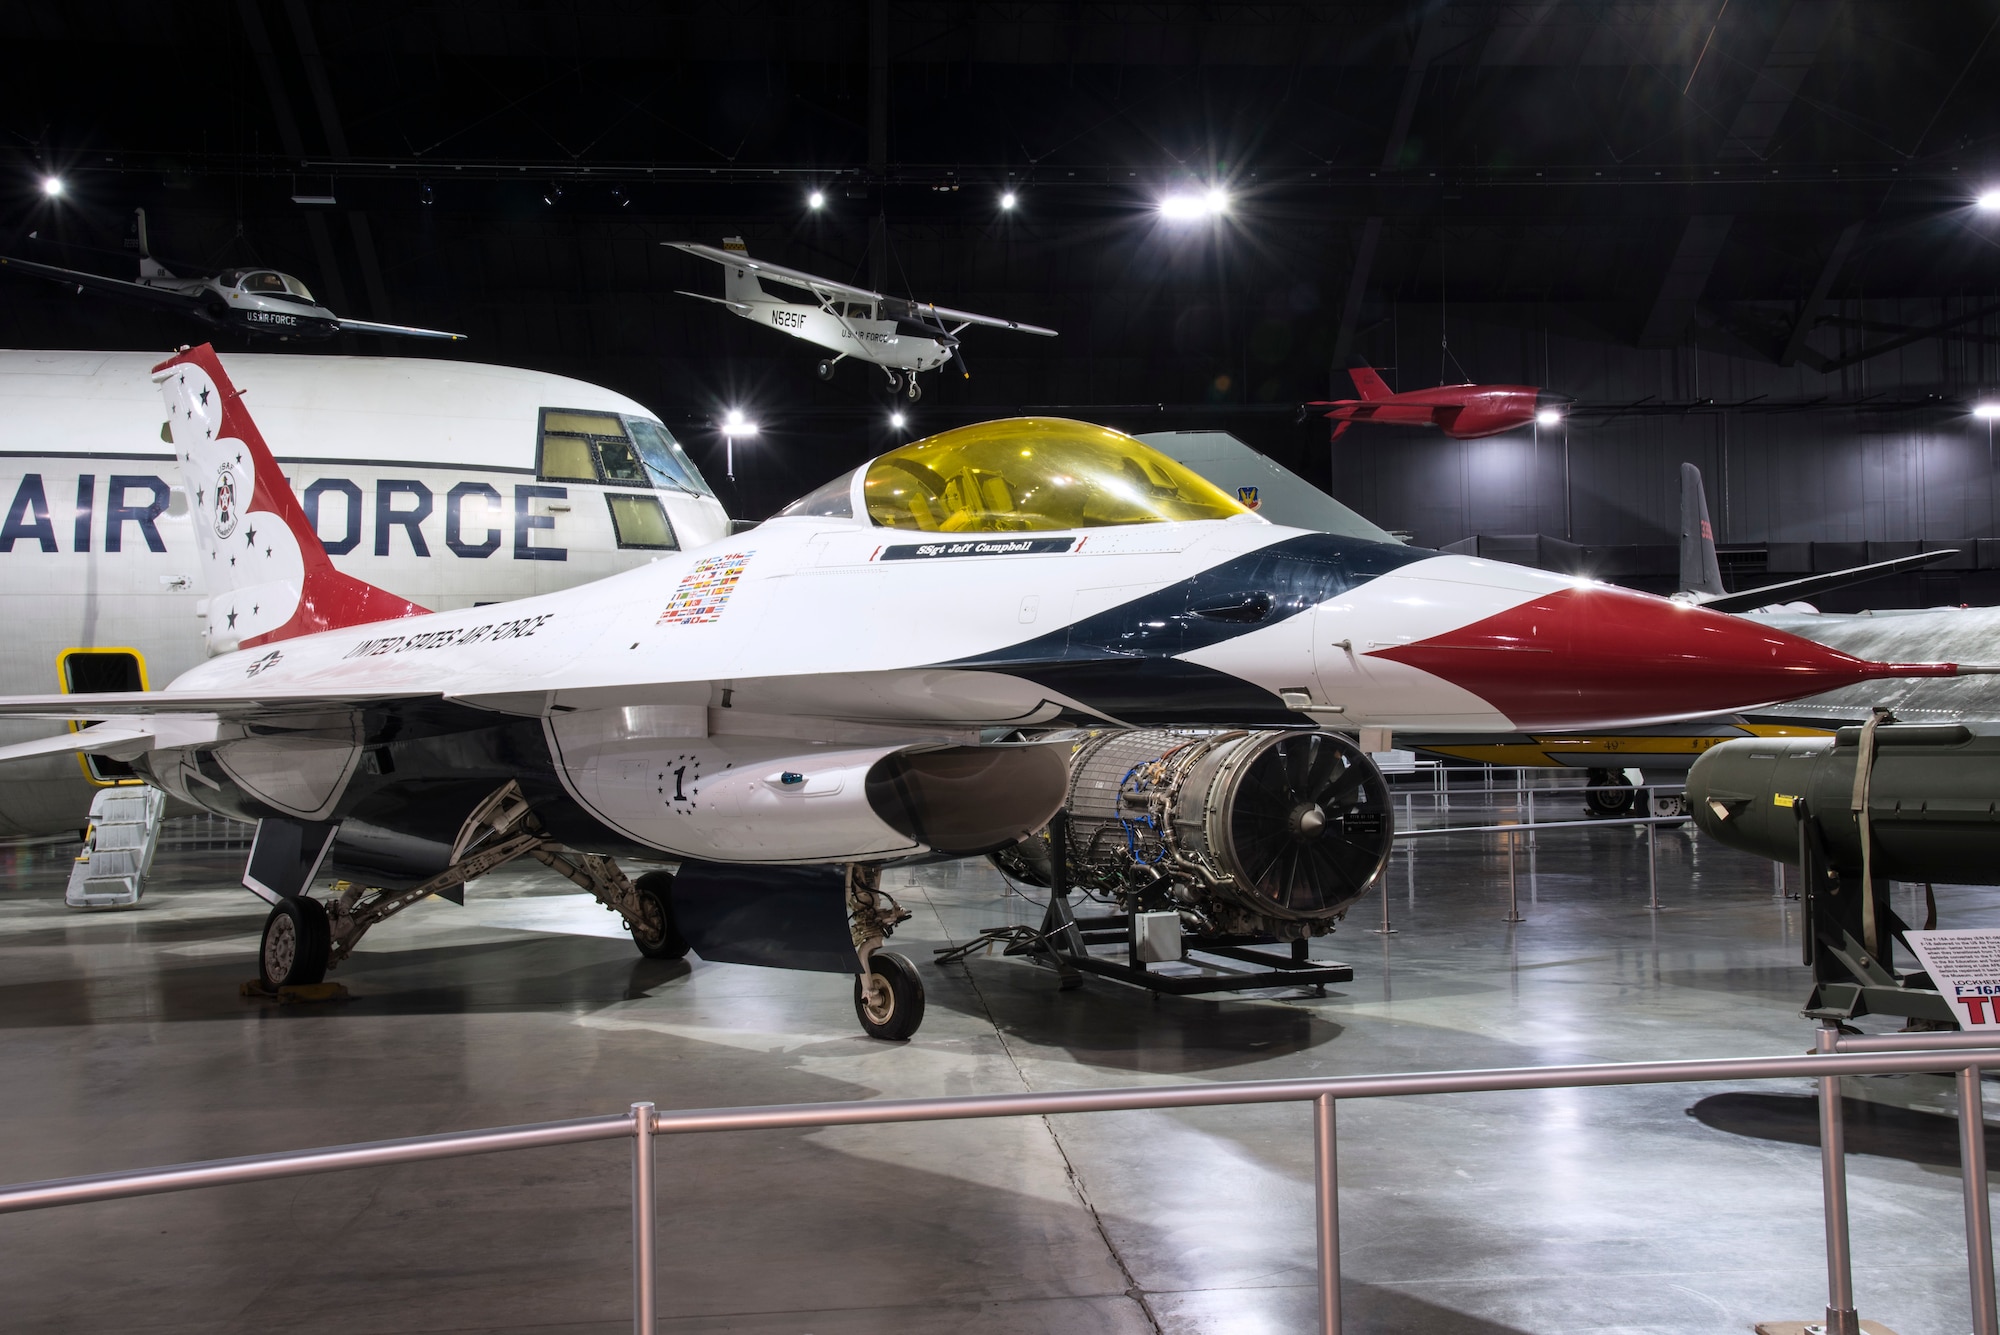 DAYTON, Ohio -- General Dynamics F-16A Fighting Falcon in the Cold War Gallery at the National Museum of the United States Air Force. (U.S. Air Force photo by Ken LaRock)